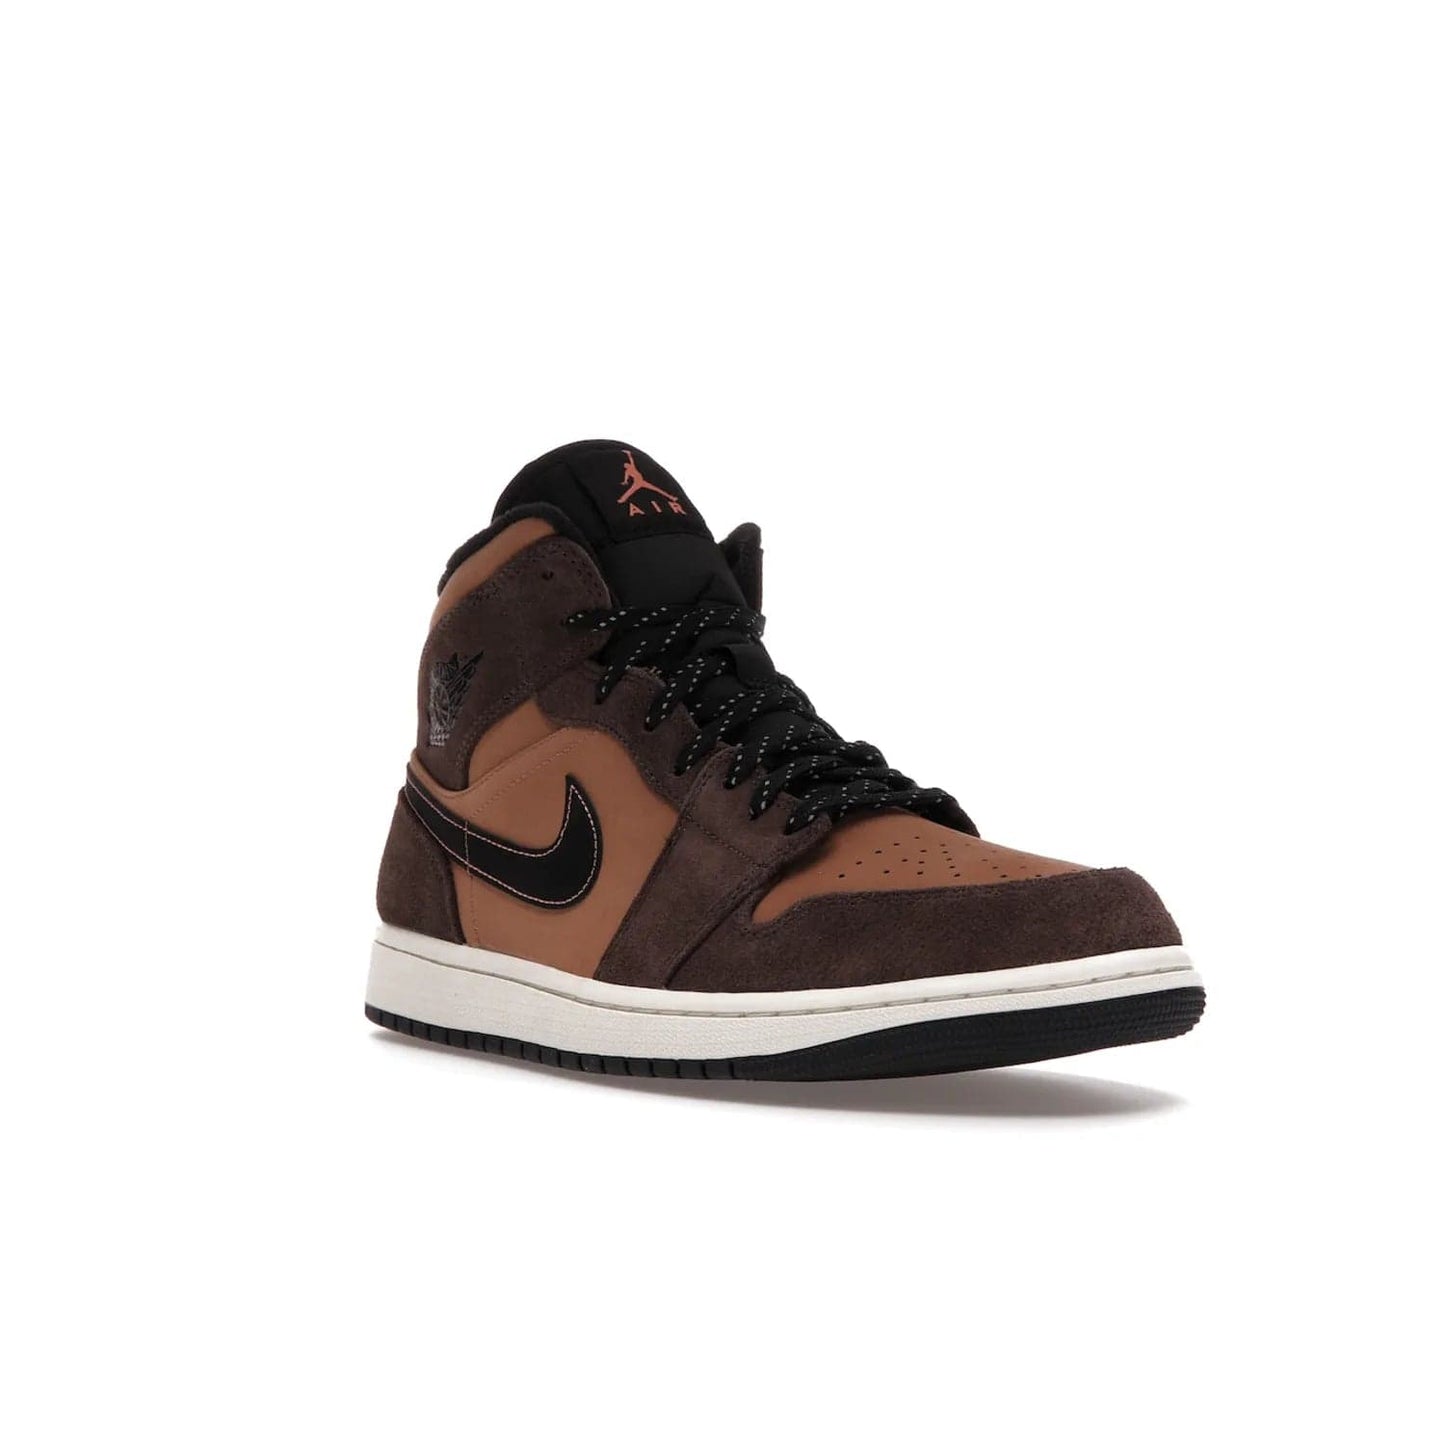 Jordan 1 Mid SE Dark Chocolate - Image 6 - Only at www.BallersClubKickz.com - This fashionable and functional Jordan 1 Mid SE Dark Chocolate features a light brown Durabuck upper, dark brown suede overlays, black Swoosh logos and reflective patch at heel. A must-have for any sneakerhead!